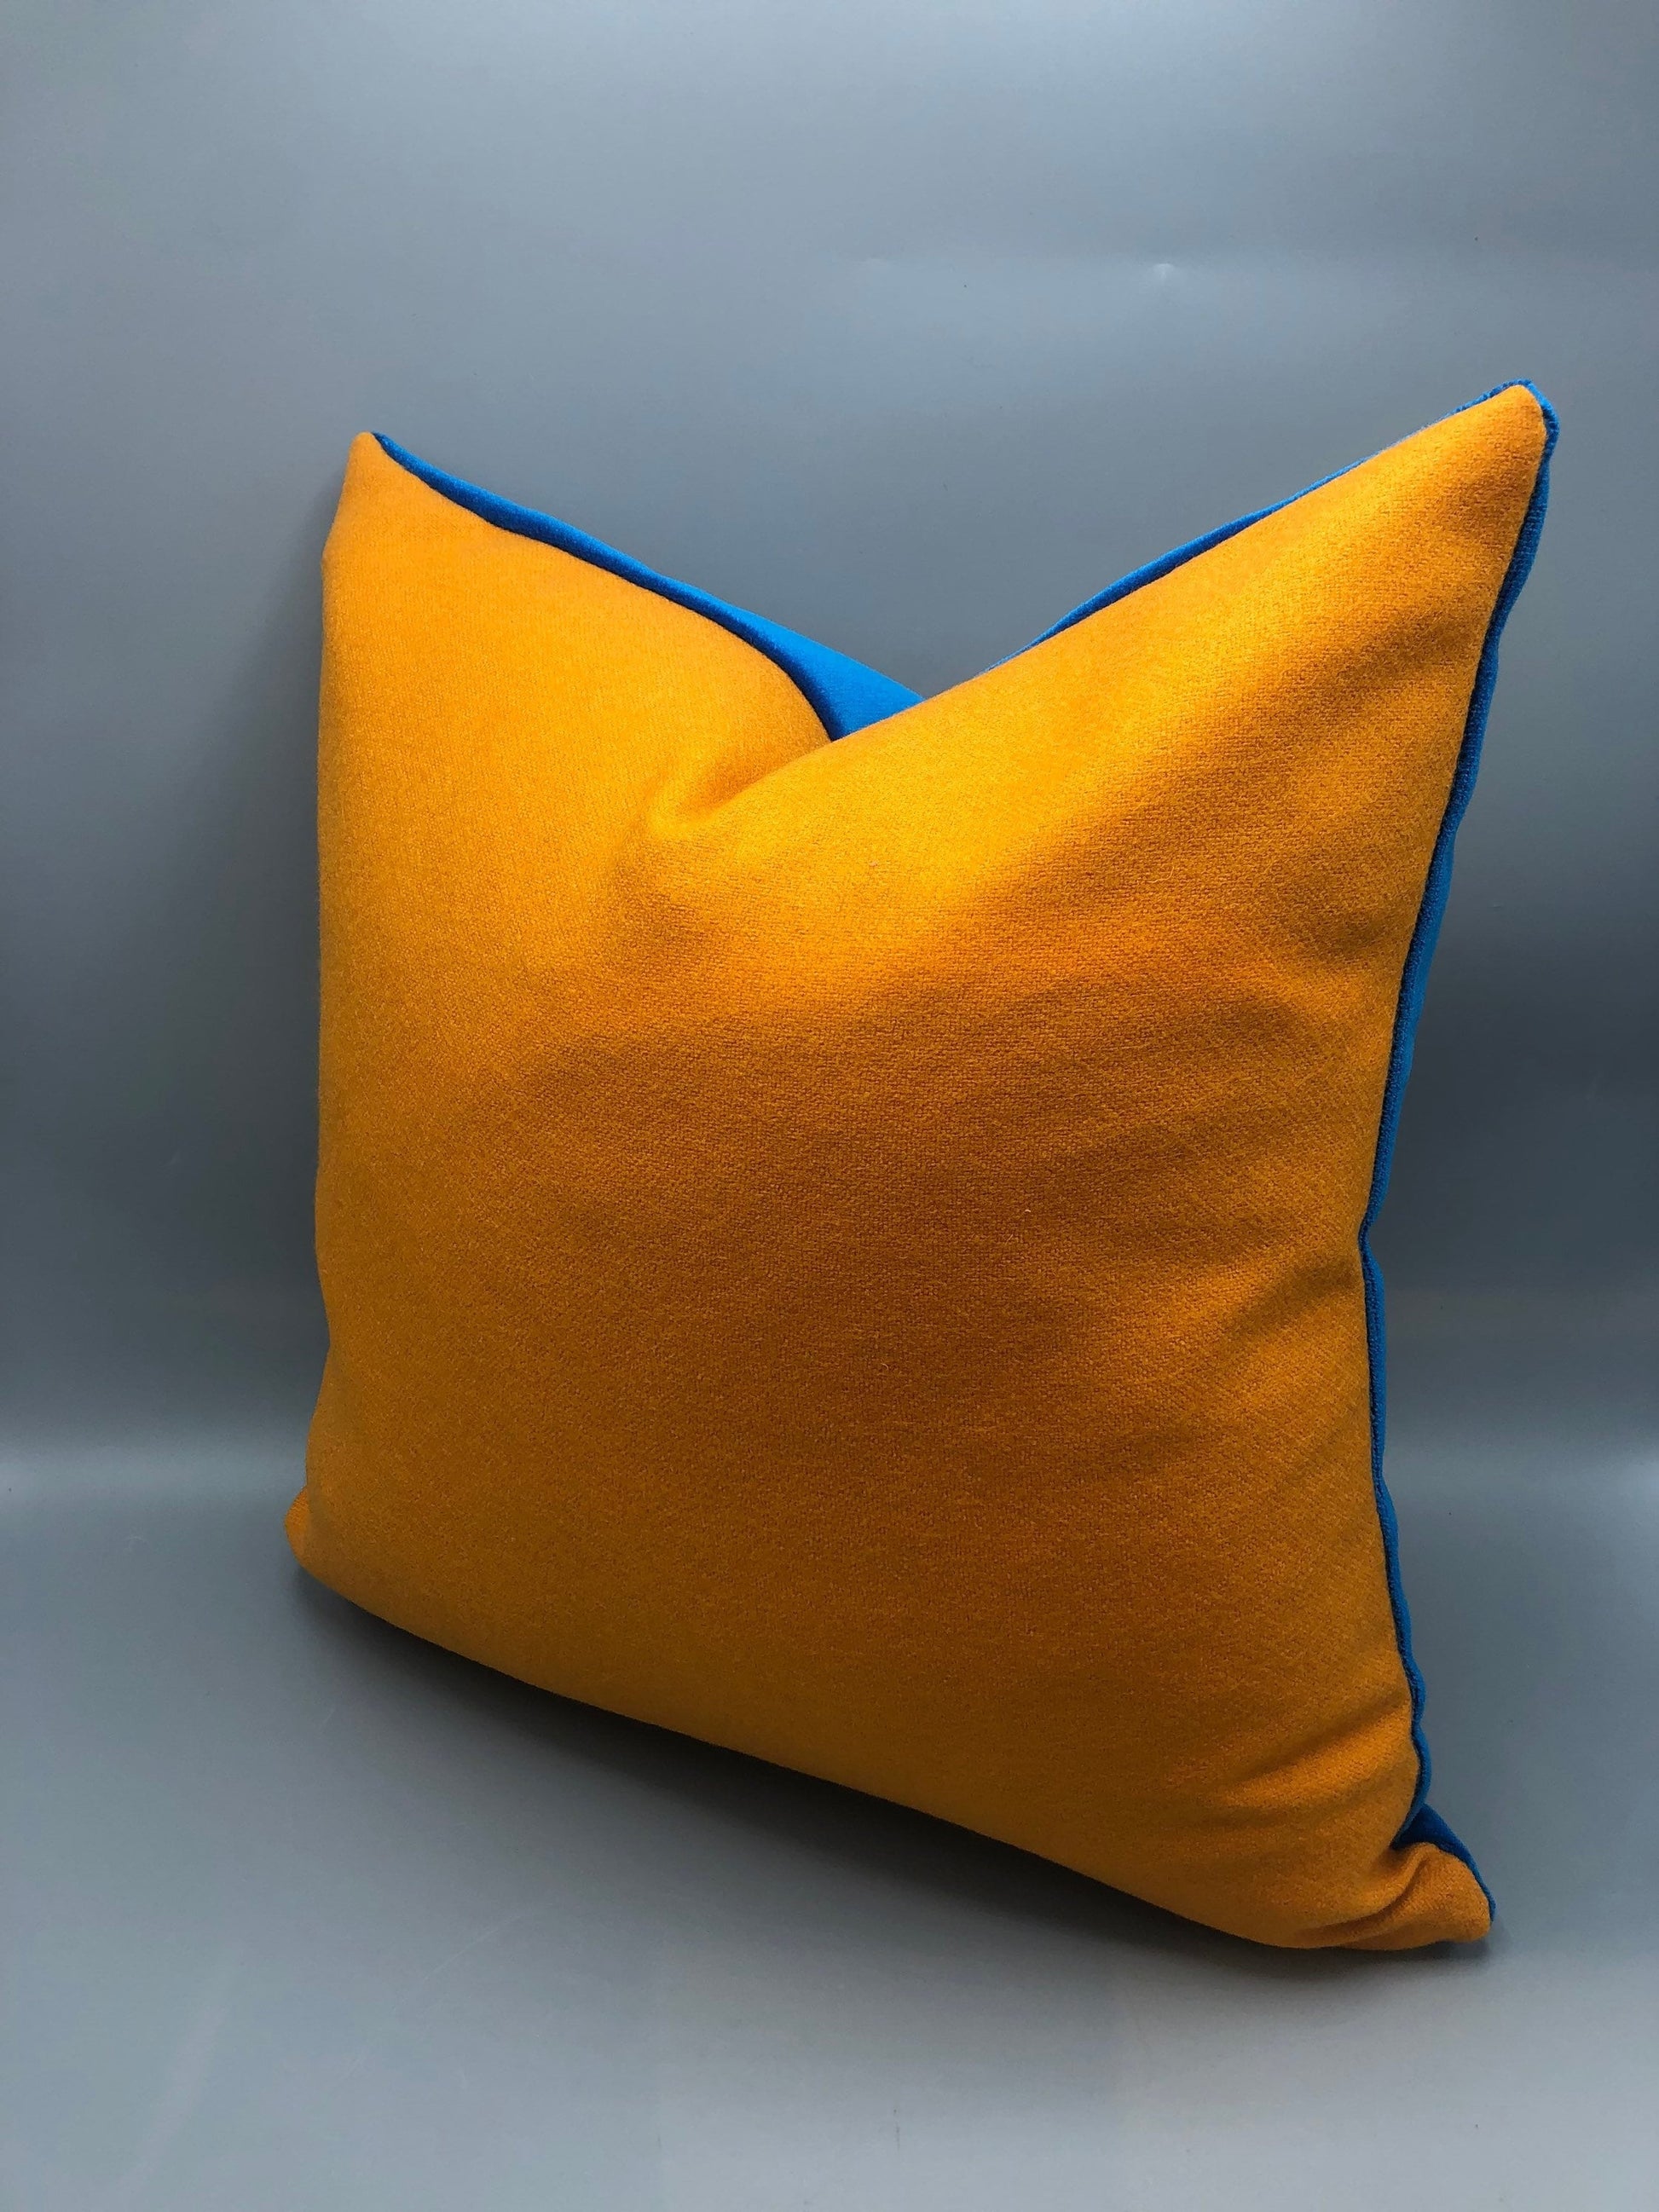 Handmade wool square pillow blue and mustard color down feather insert. 18” x 18”